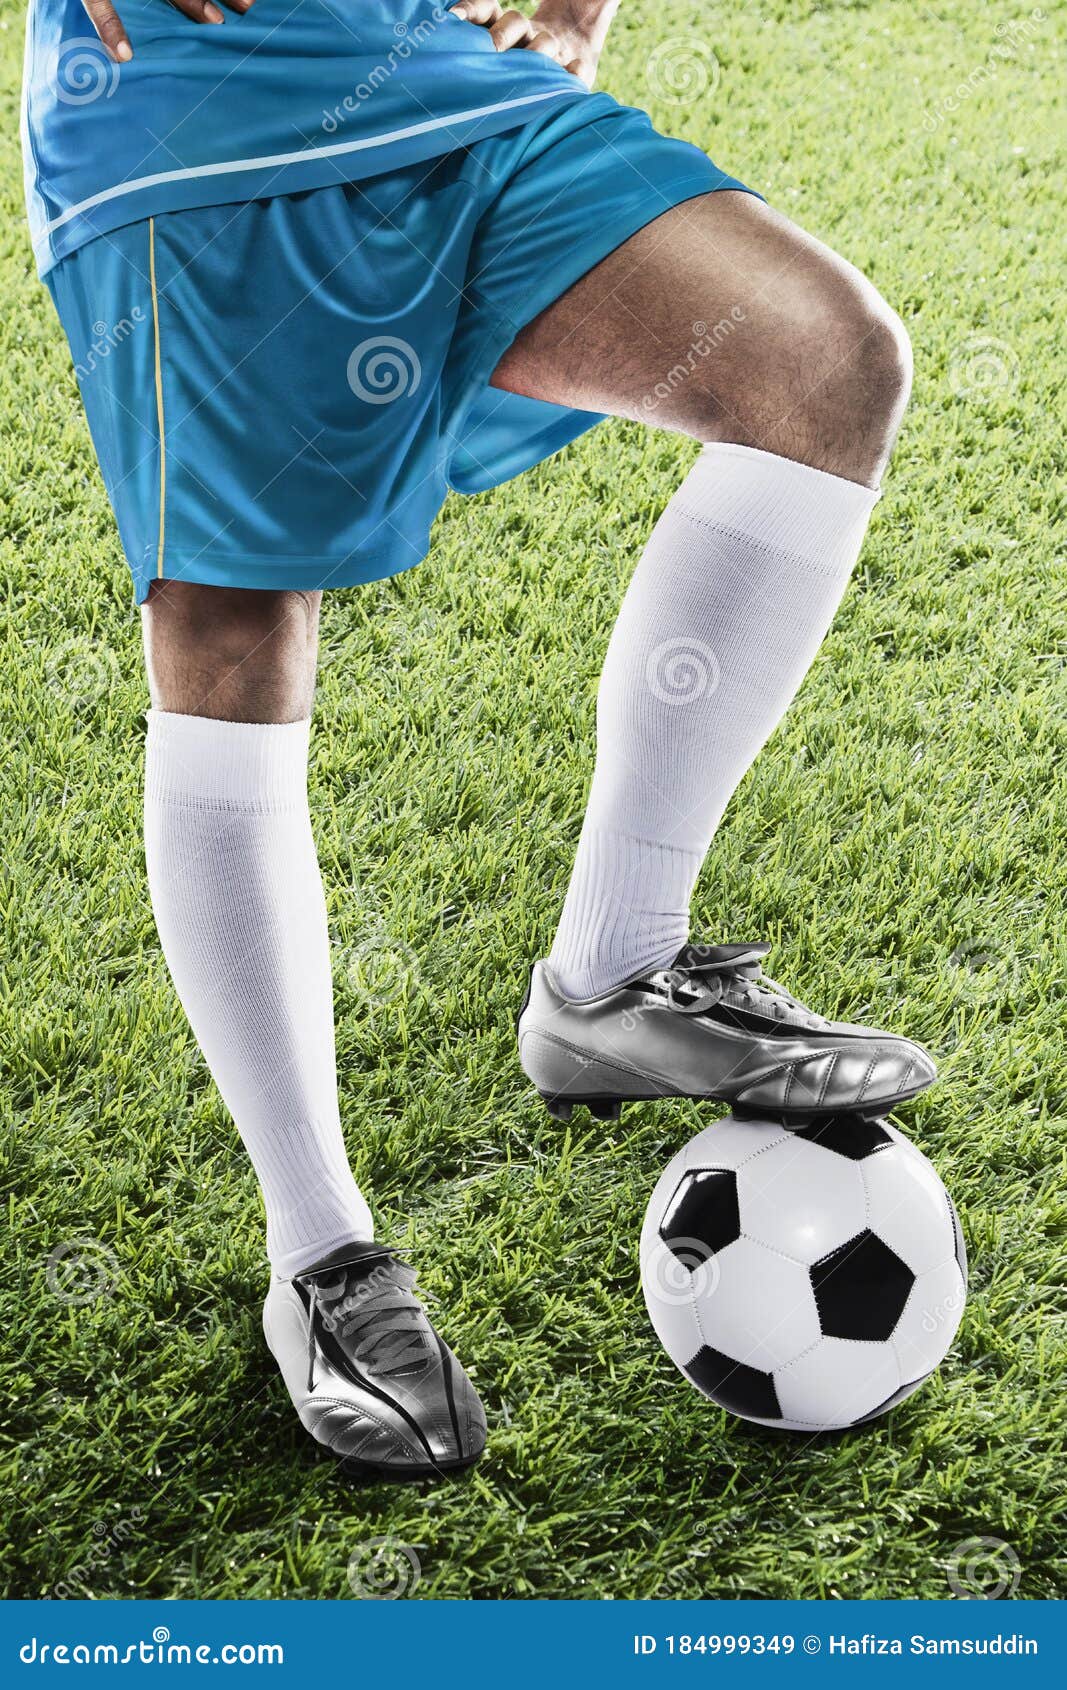 Argentina Soccer Player Ready for Kick Off Stock Image - Image of ...